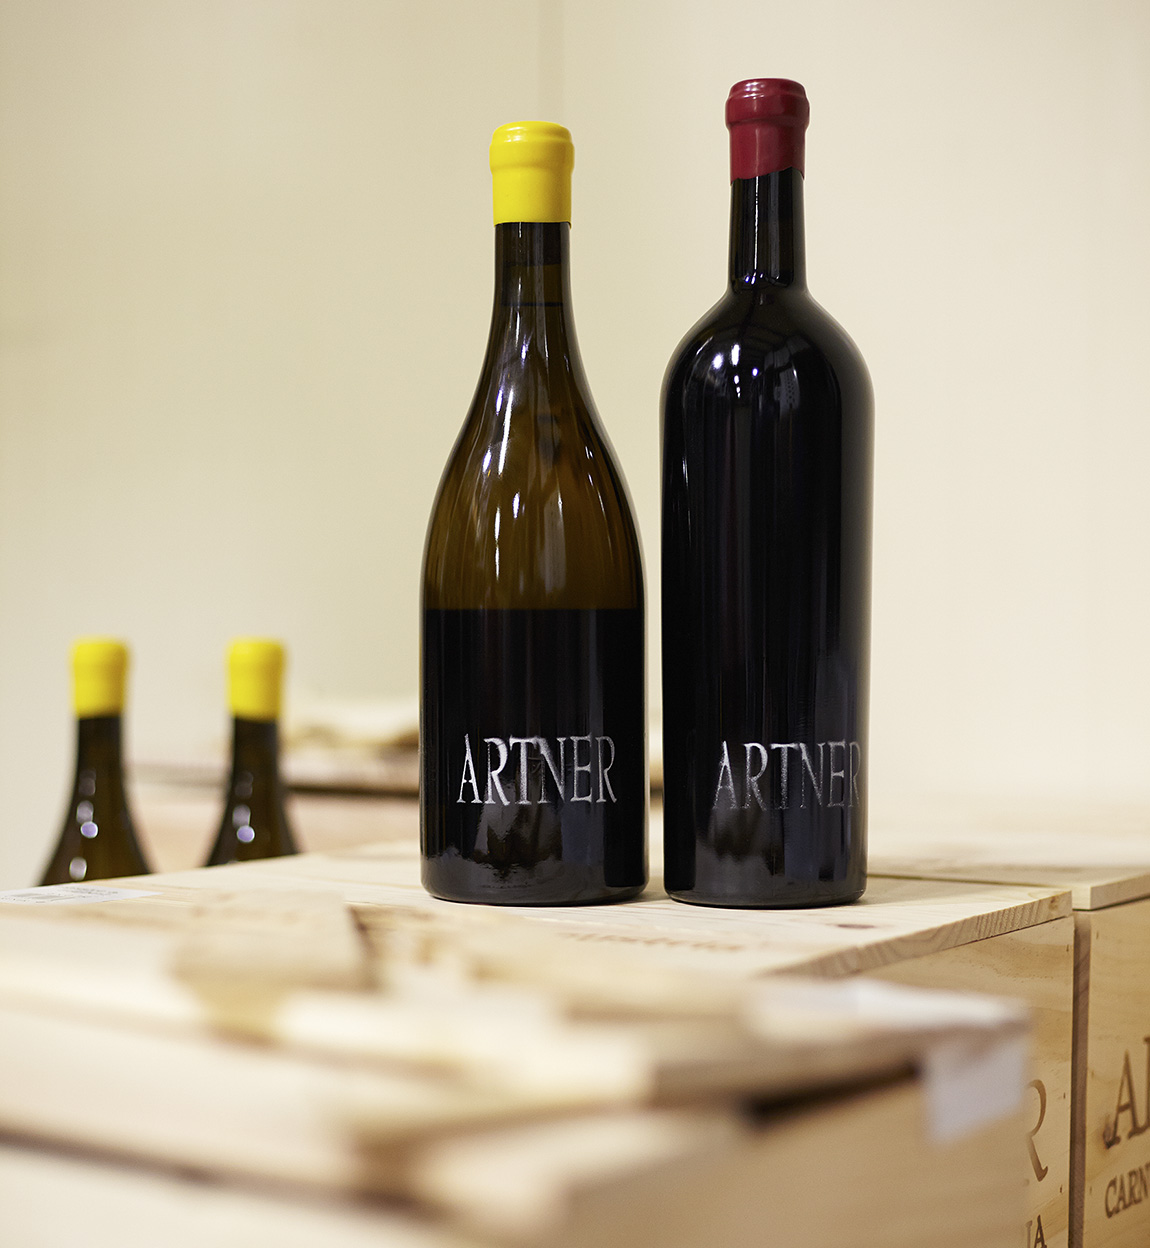 AN INDULGENCE FOR THE PALATE…WELCOME TO THE ARTNER FAMILY WINE ESTATE